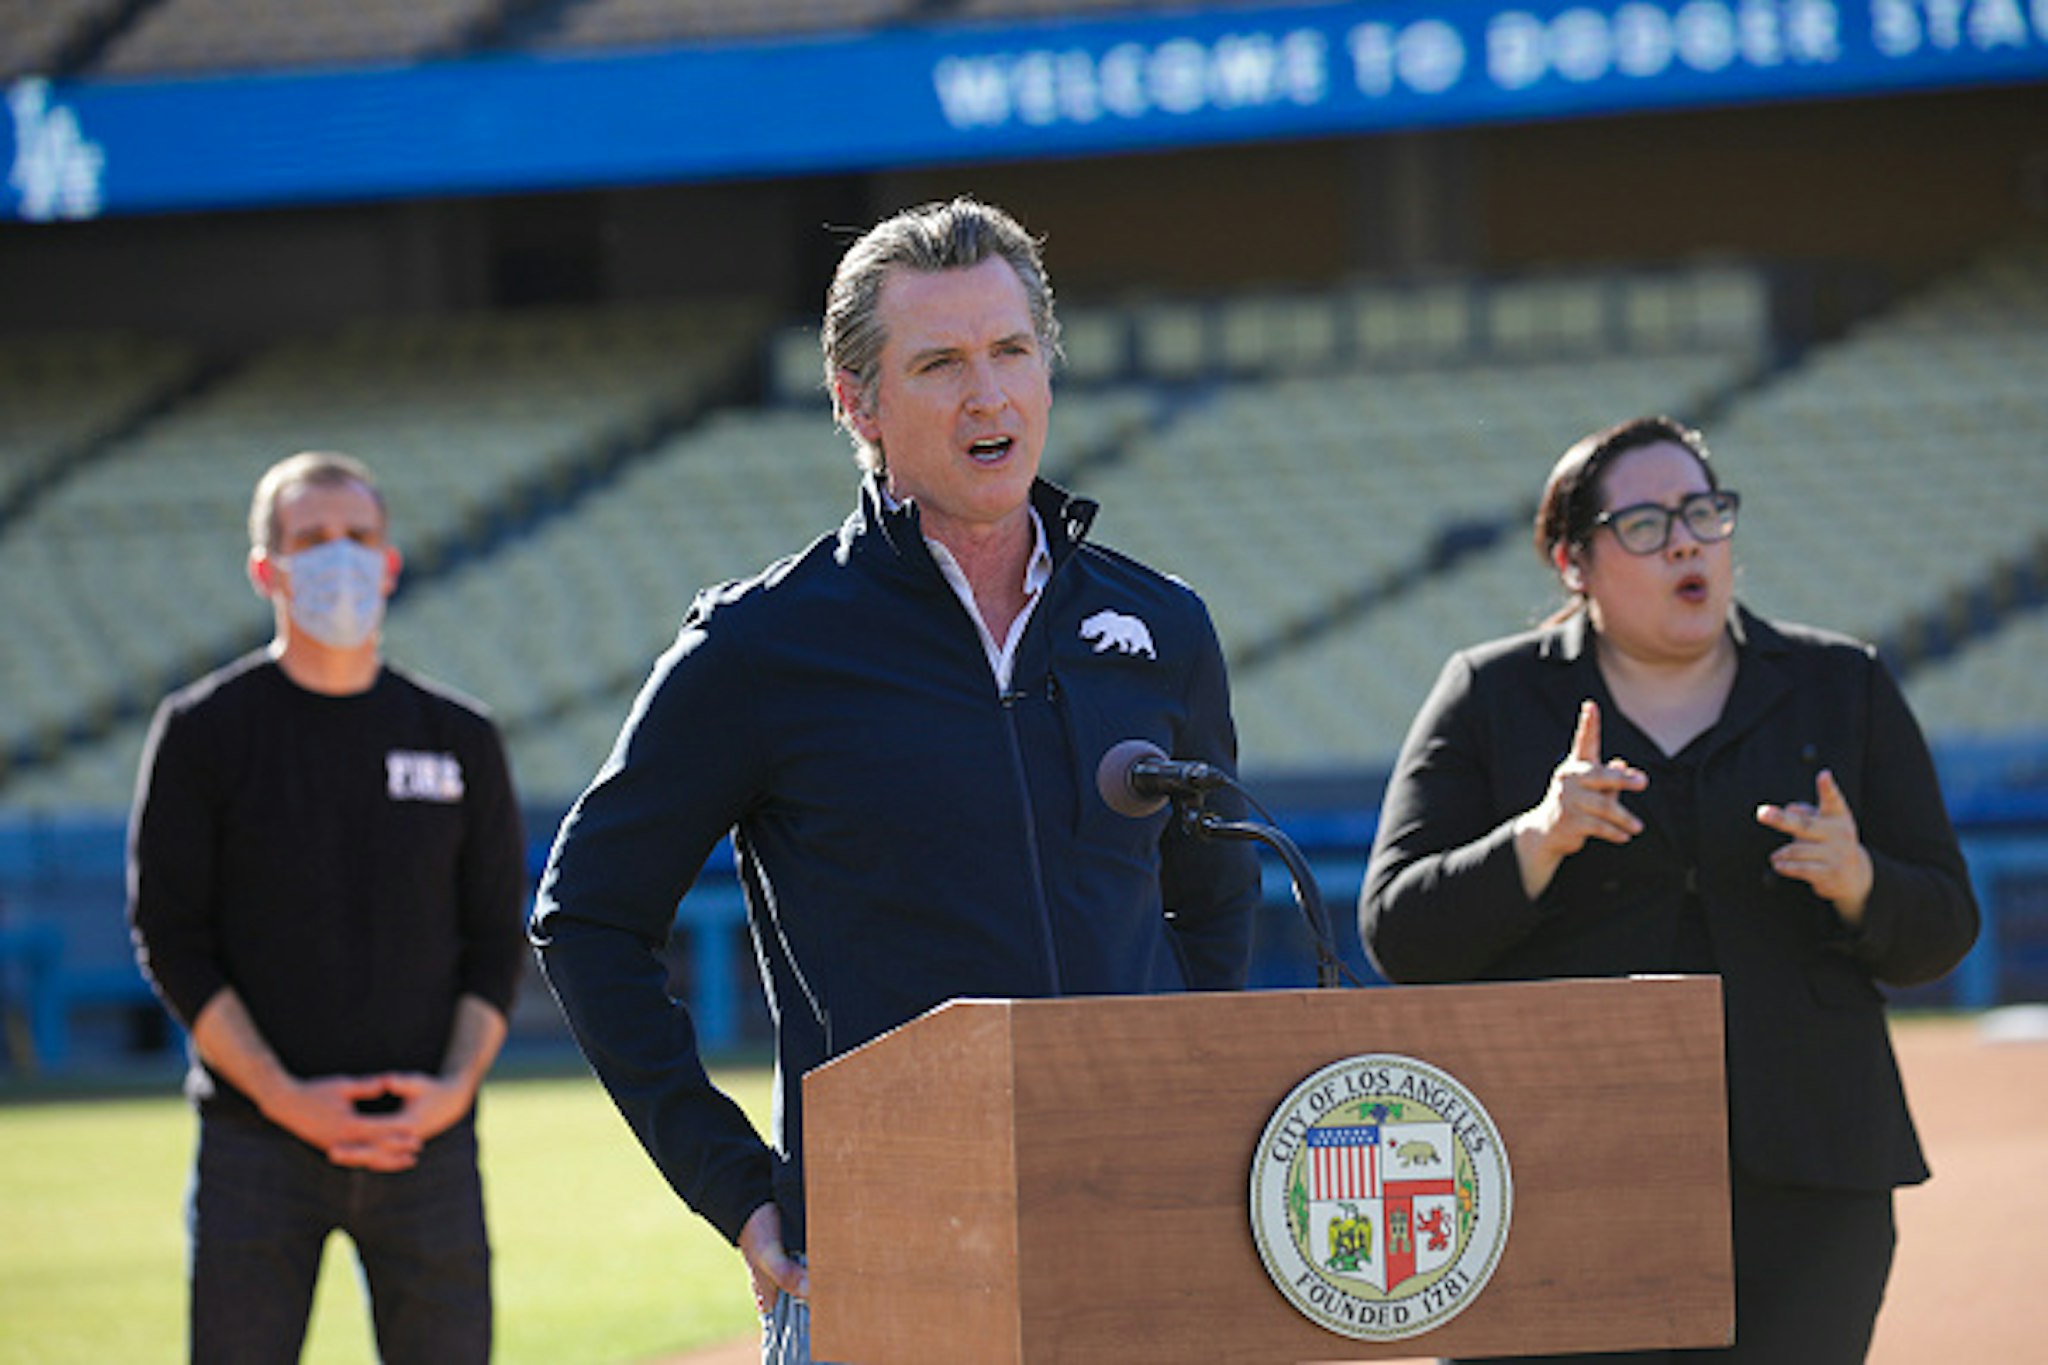 California Governor Gavin Newsom addresses a press conference held at the launch of mass Covid-19 vaccination site at Dodger Stadium on January 15, 2021 in Los Angeles, California.